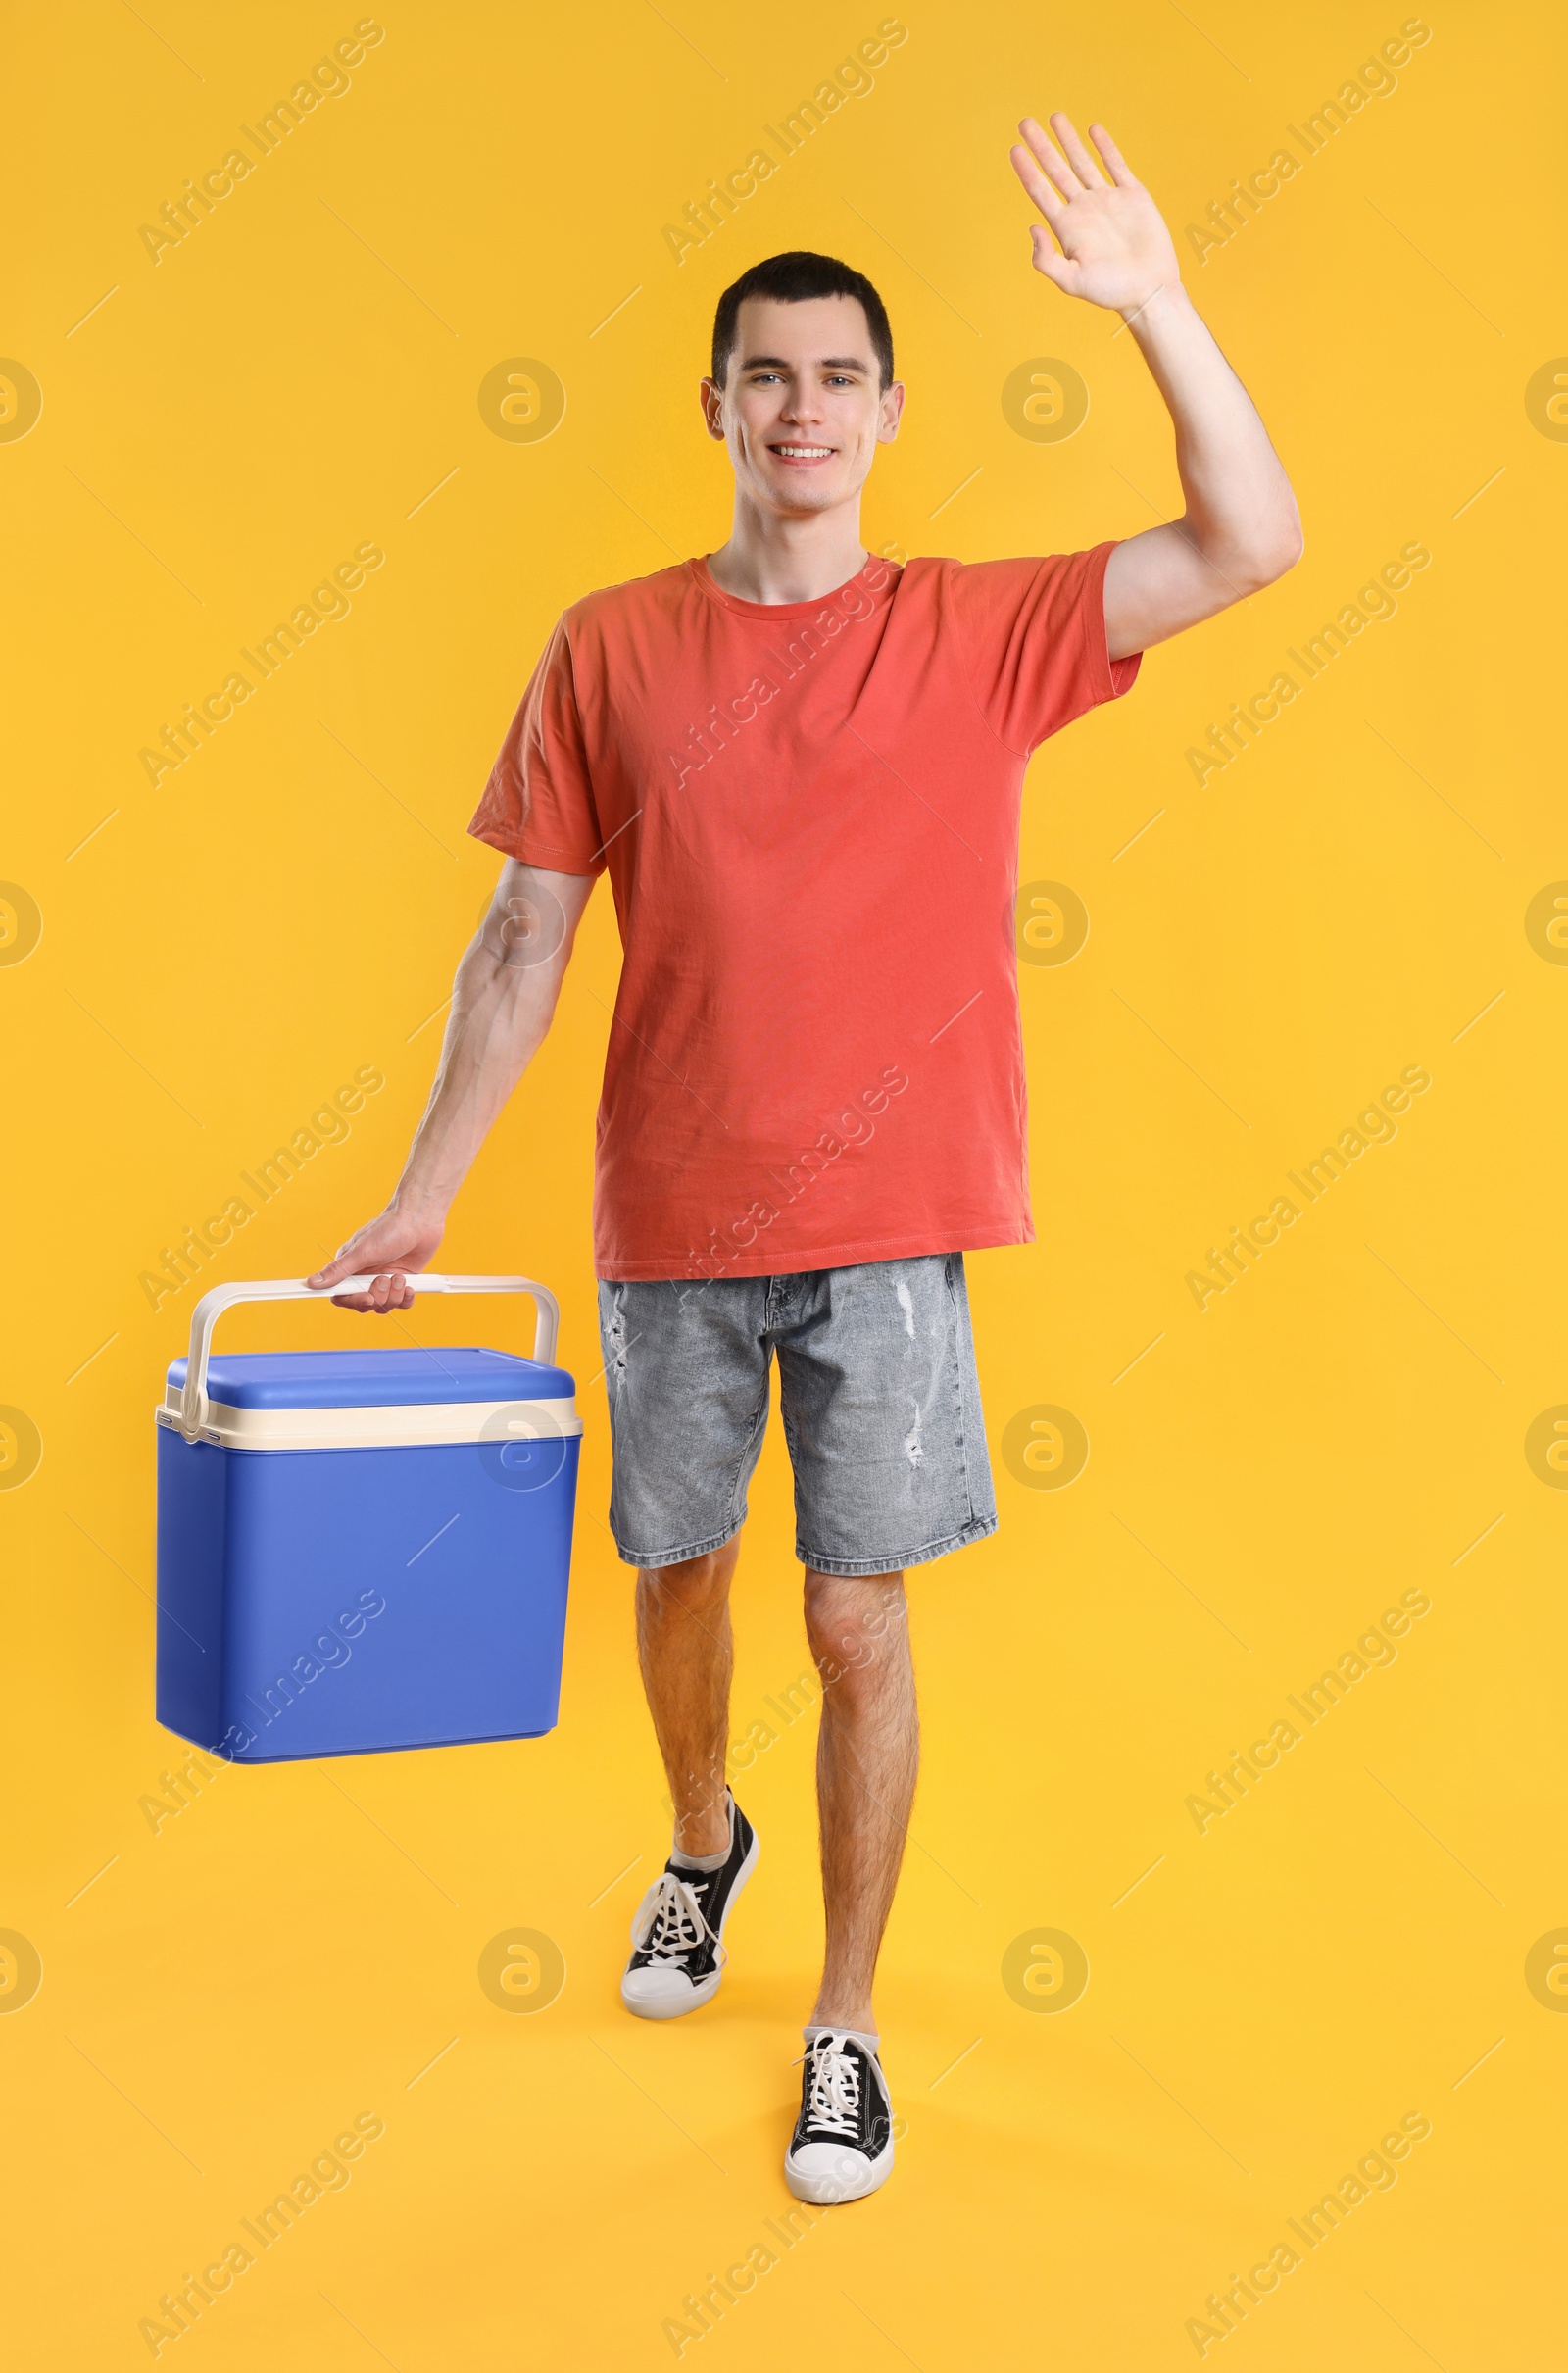 Photo of Man with blue cool box walking and greeting someone on orange background